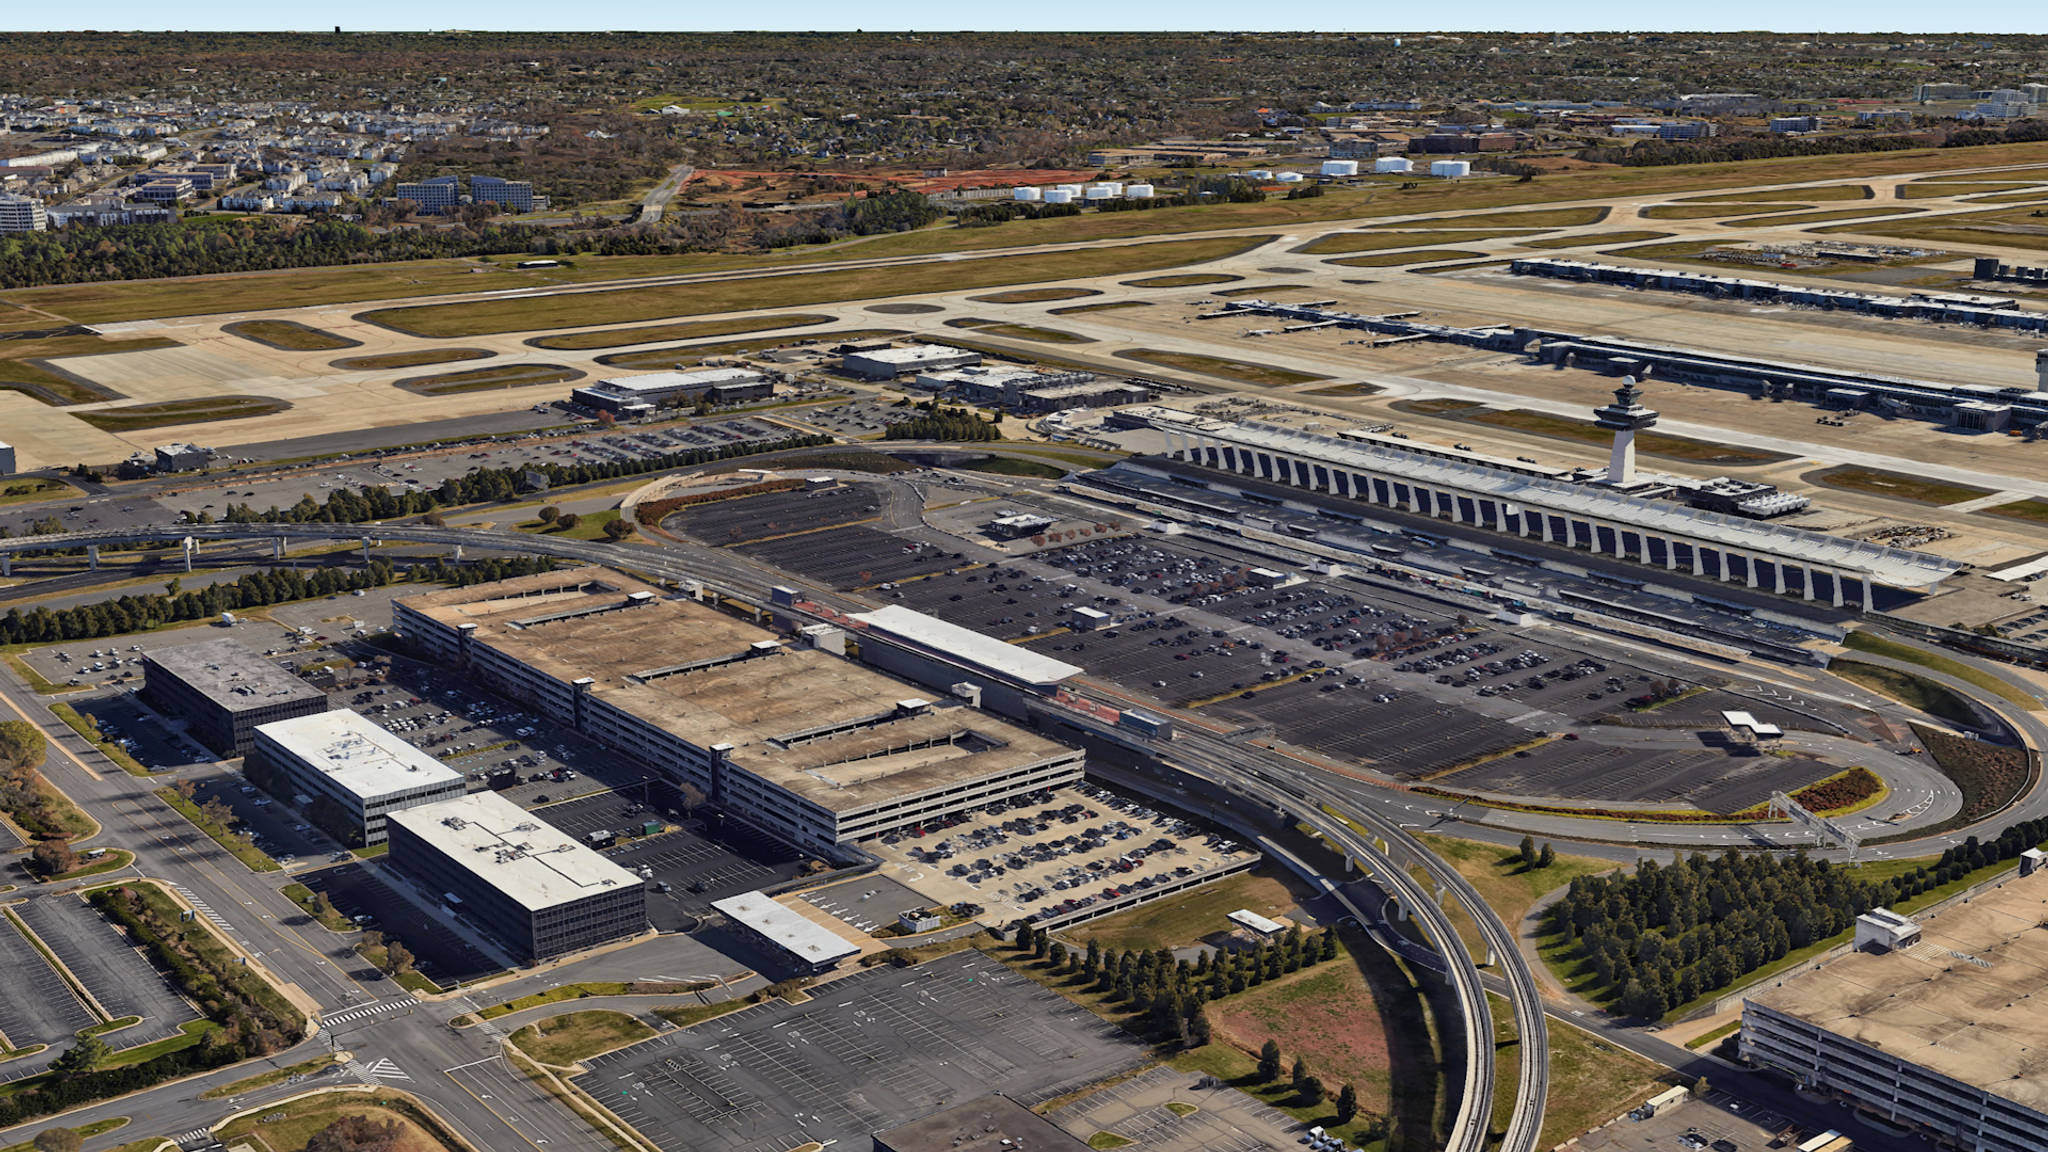  Aerial View of Dulles Airport Parking